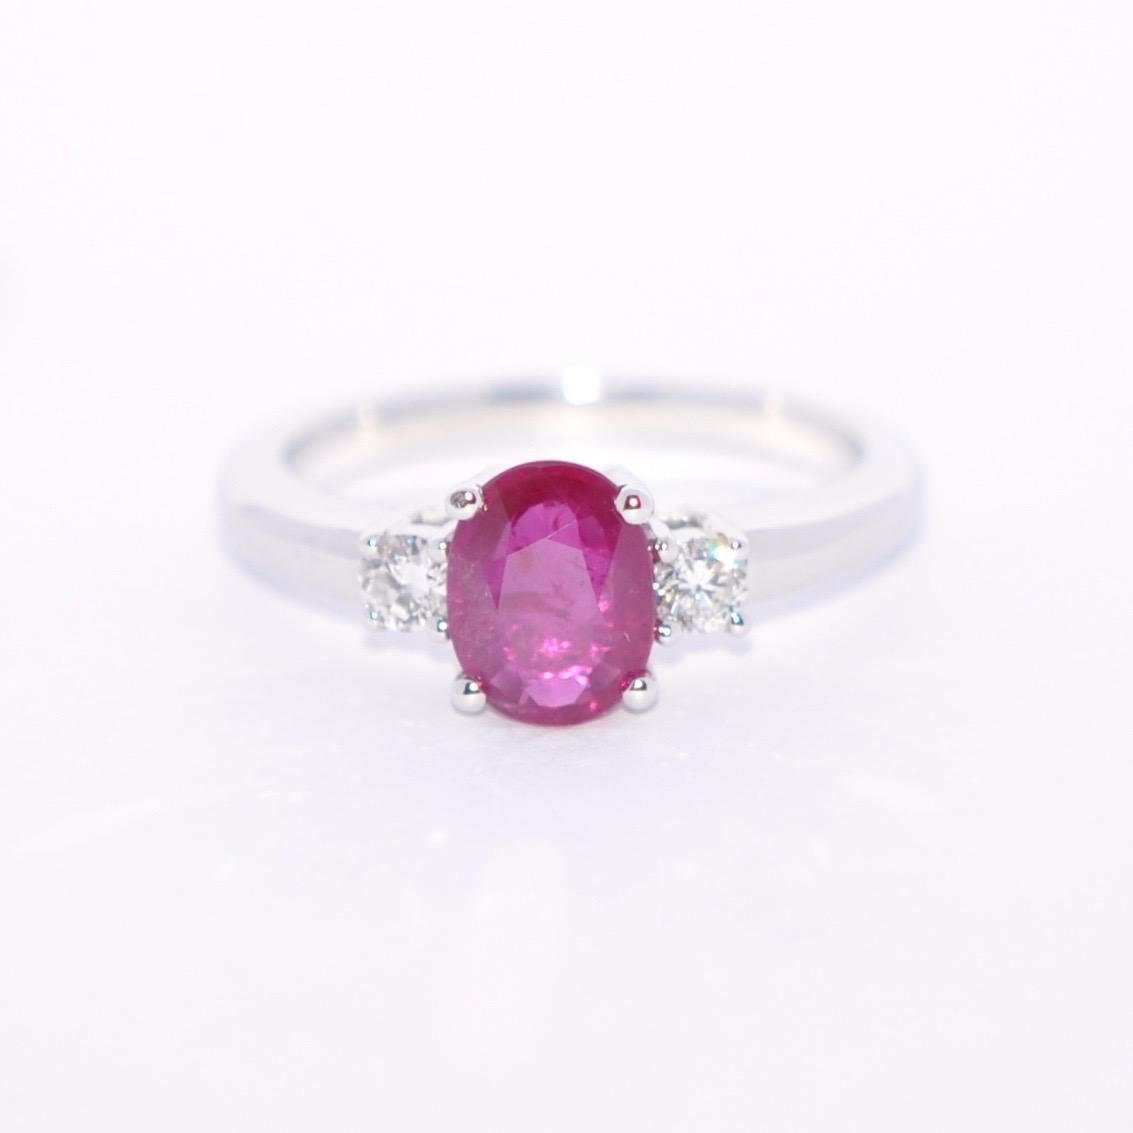 Discover this Rose Ruby and White Diamond on White Gold 18 Karat Engagement Ring.
Oval Rose Ruby 1.31 Karat
2 Round White Diamond 0.20 Karat Color G 
White Gold 18 Karat 
French Size 53 
US Size 6.5